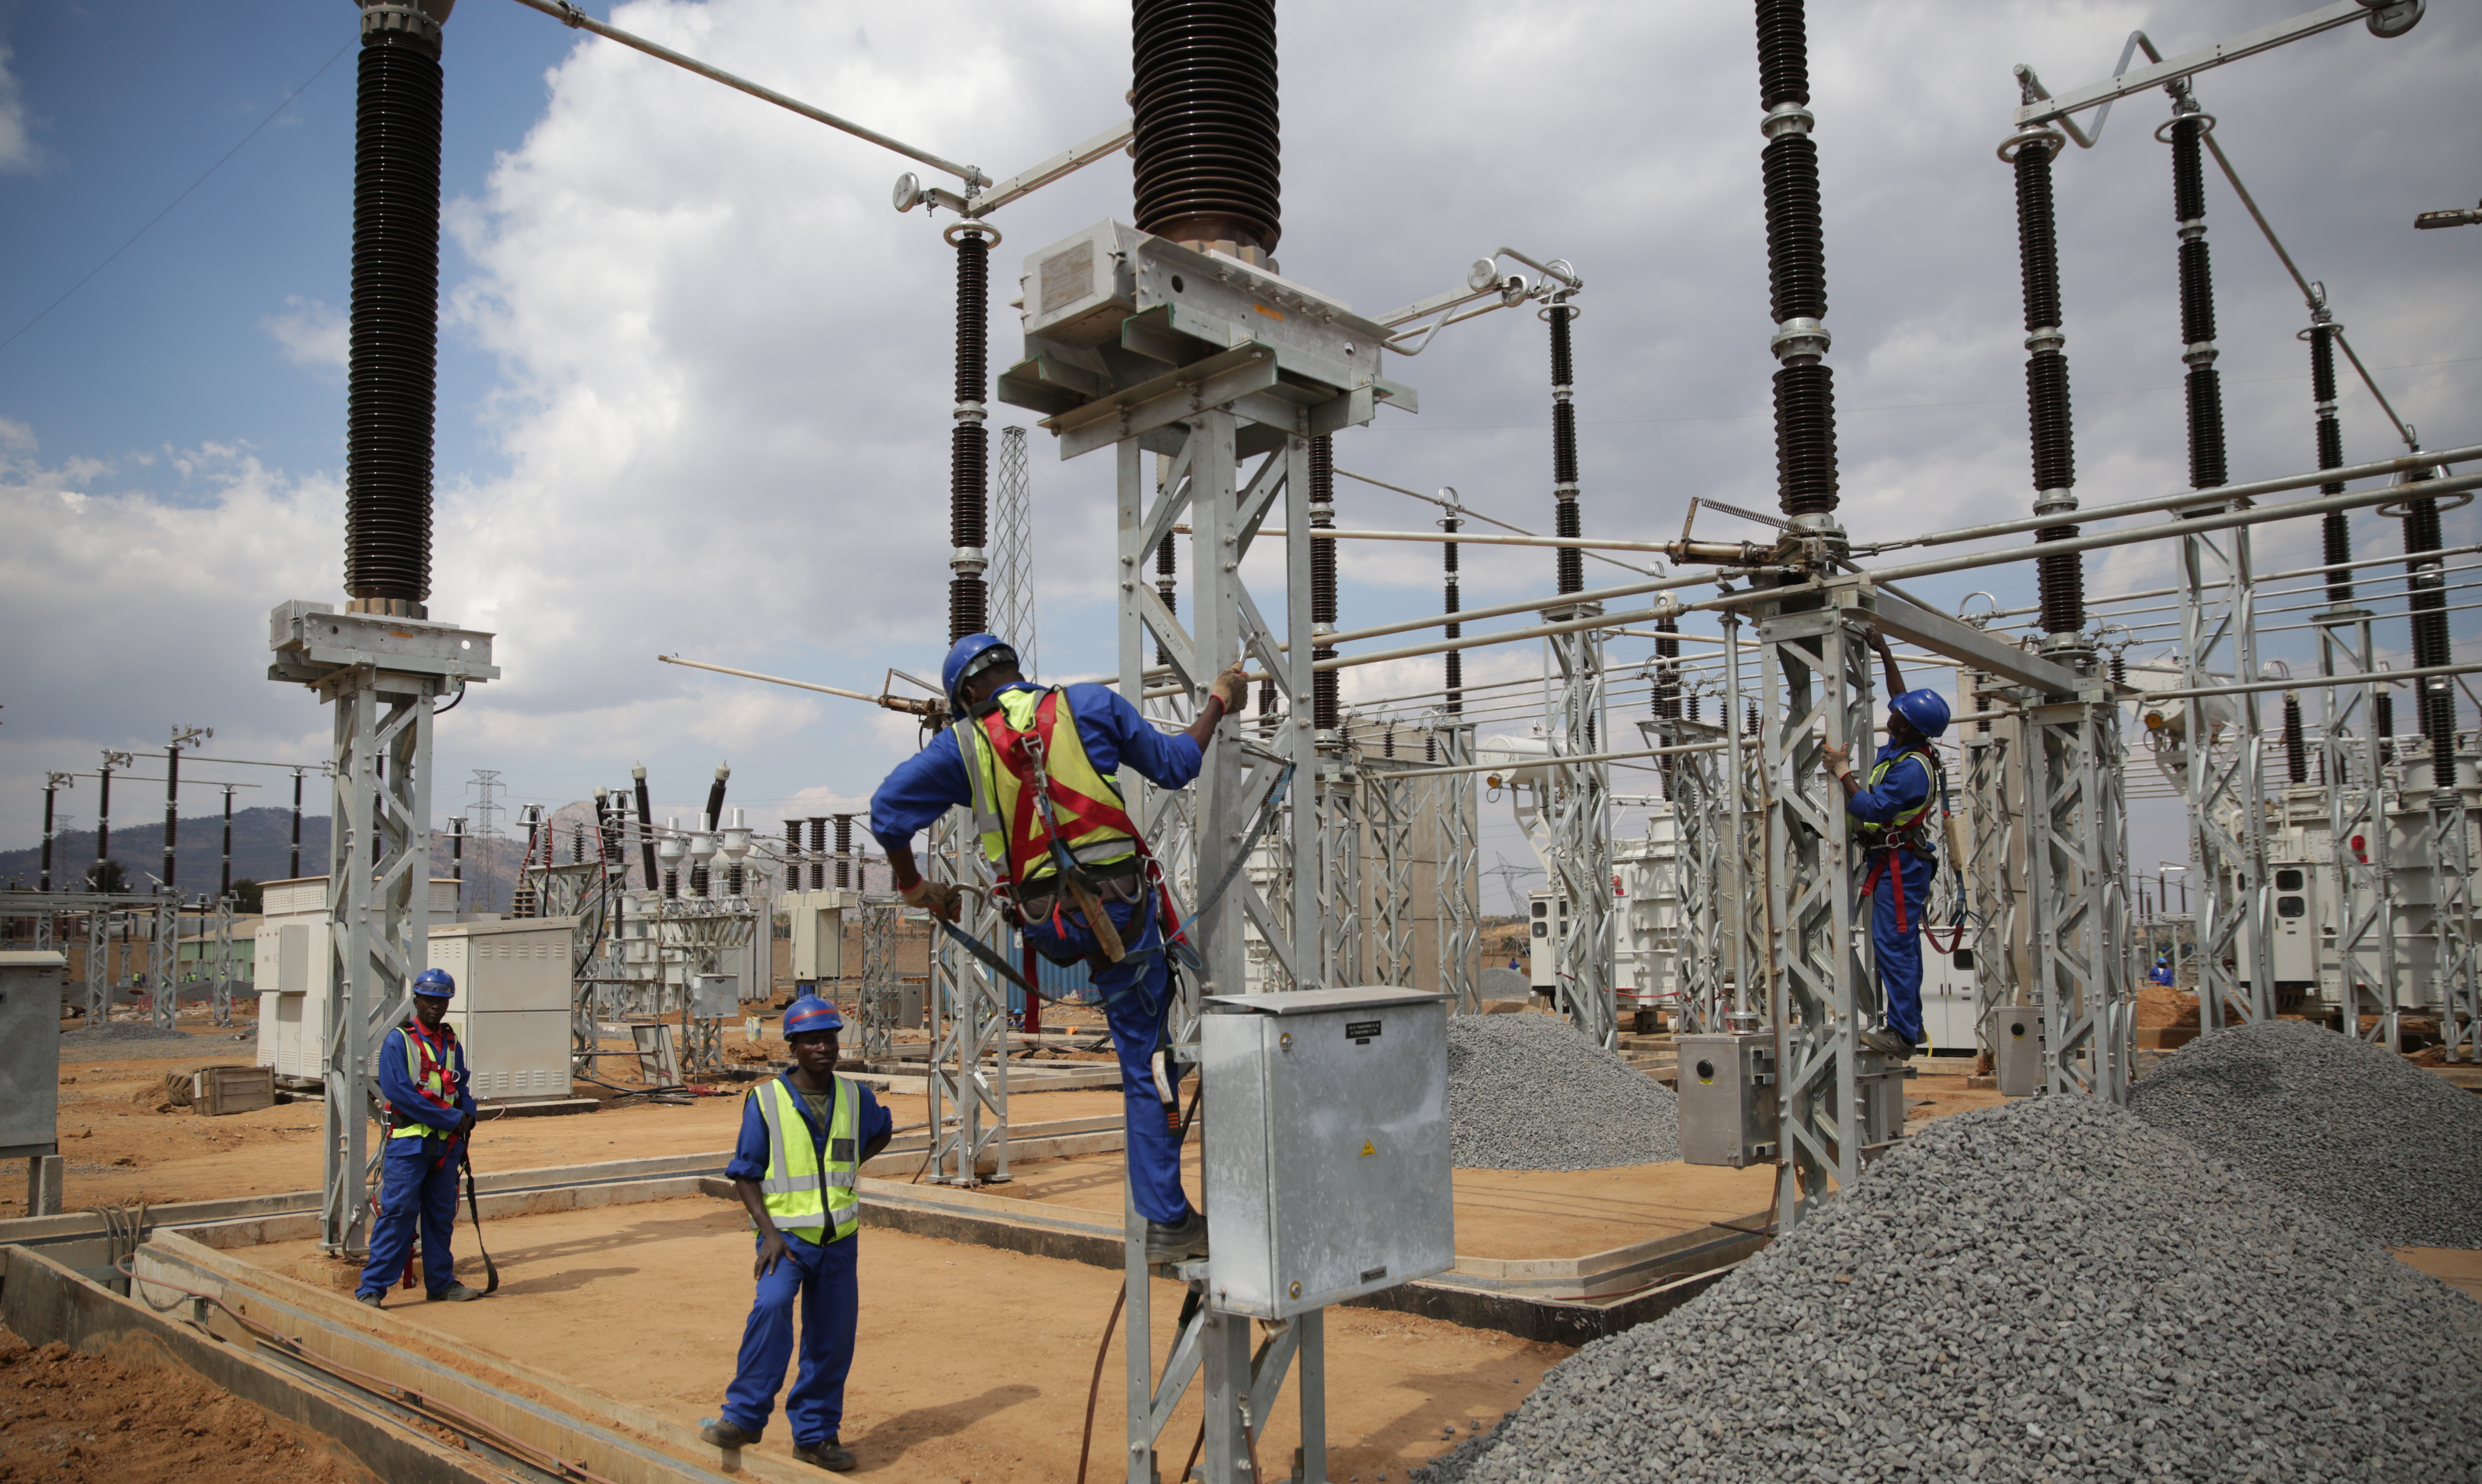 Workers at the 400-kv Nkhoma Substation in Malawi